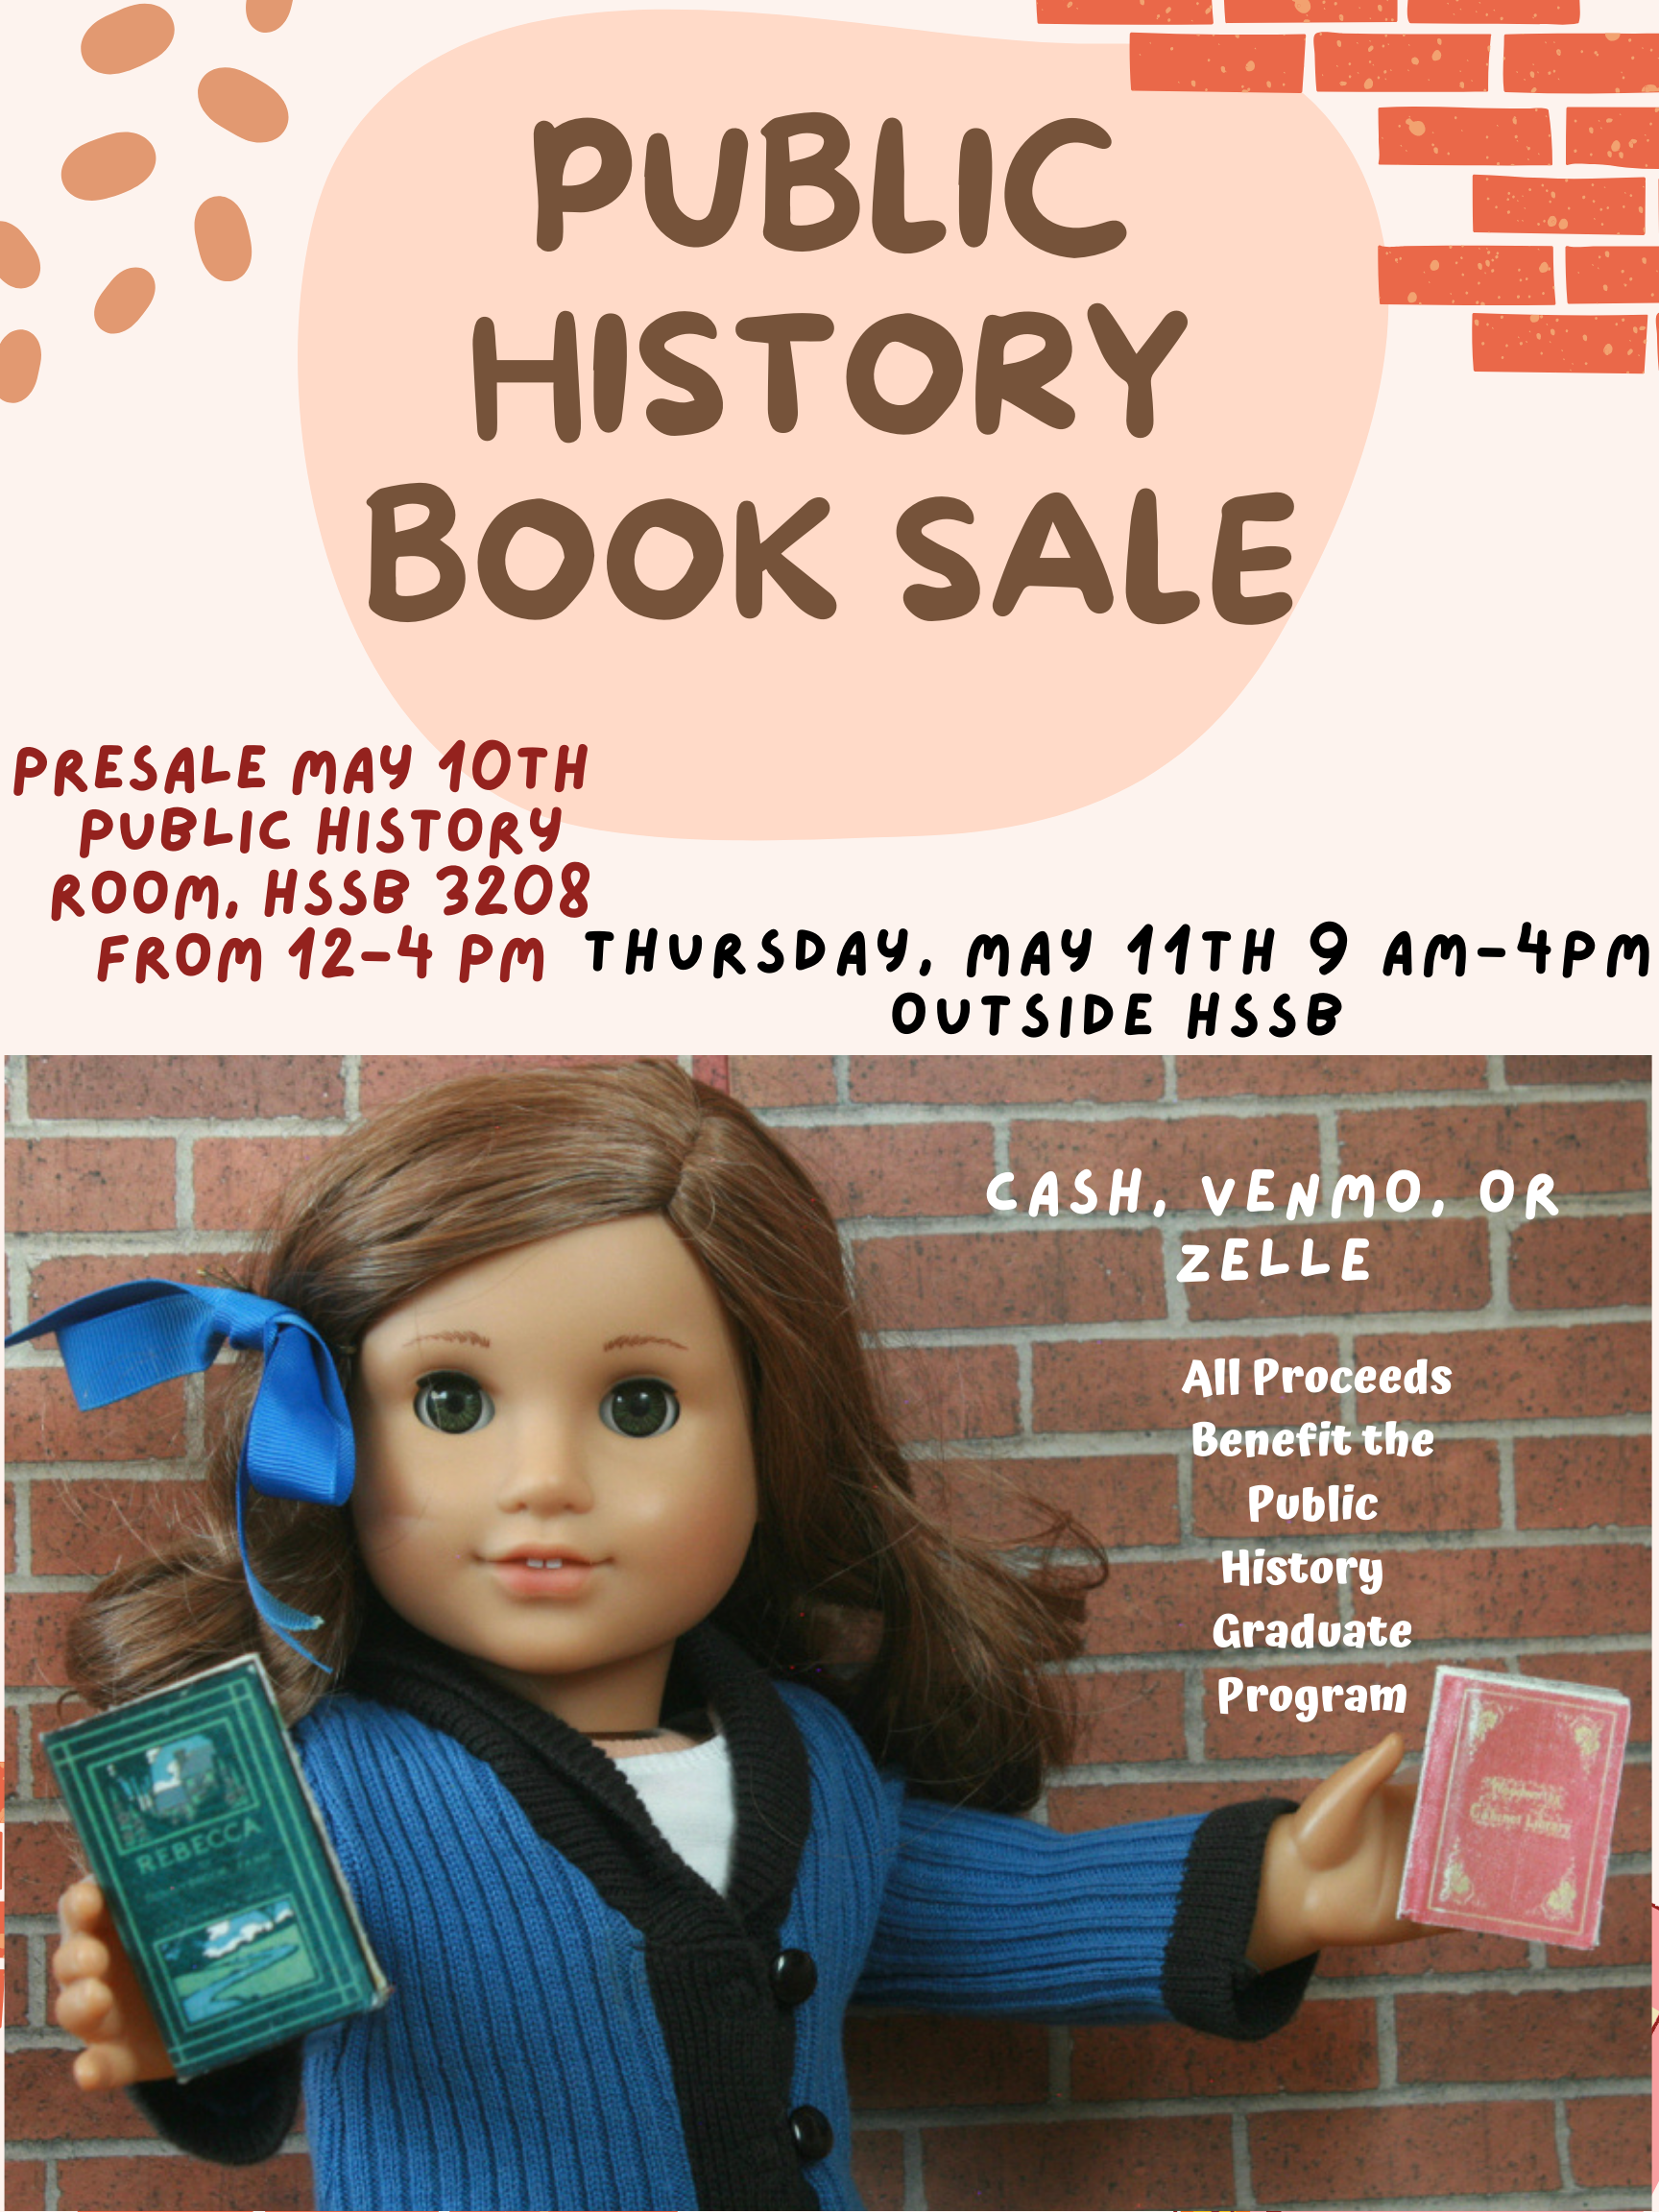 Flyer for Public History Book Sale, information is on event page.